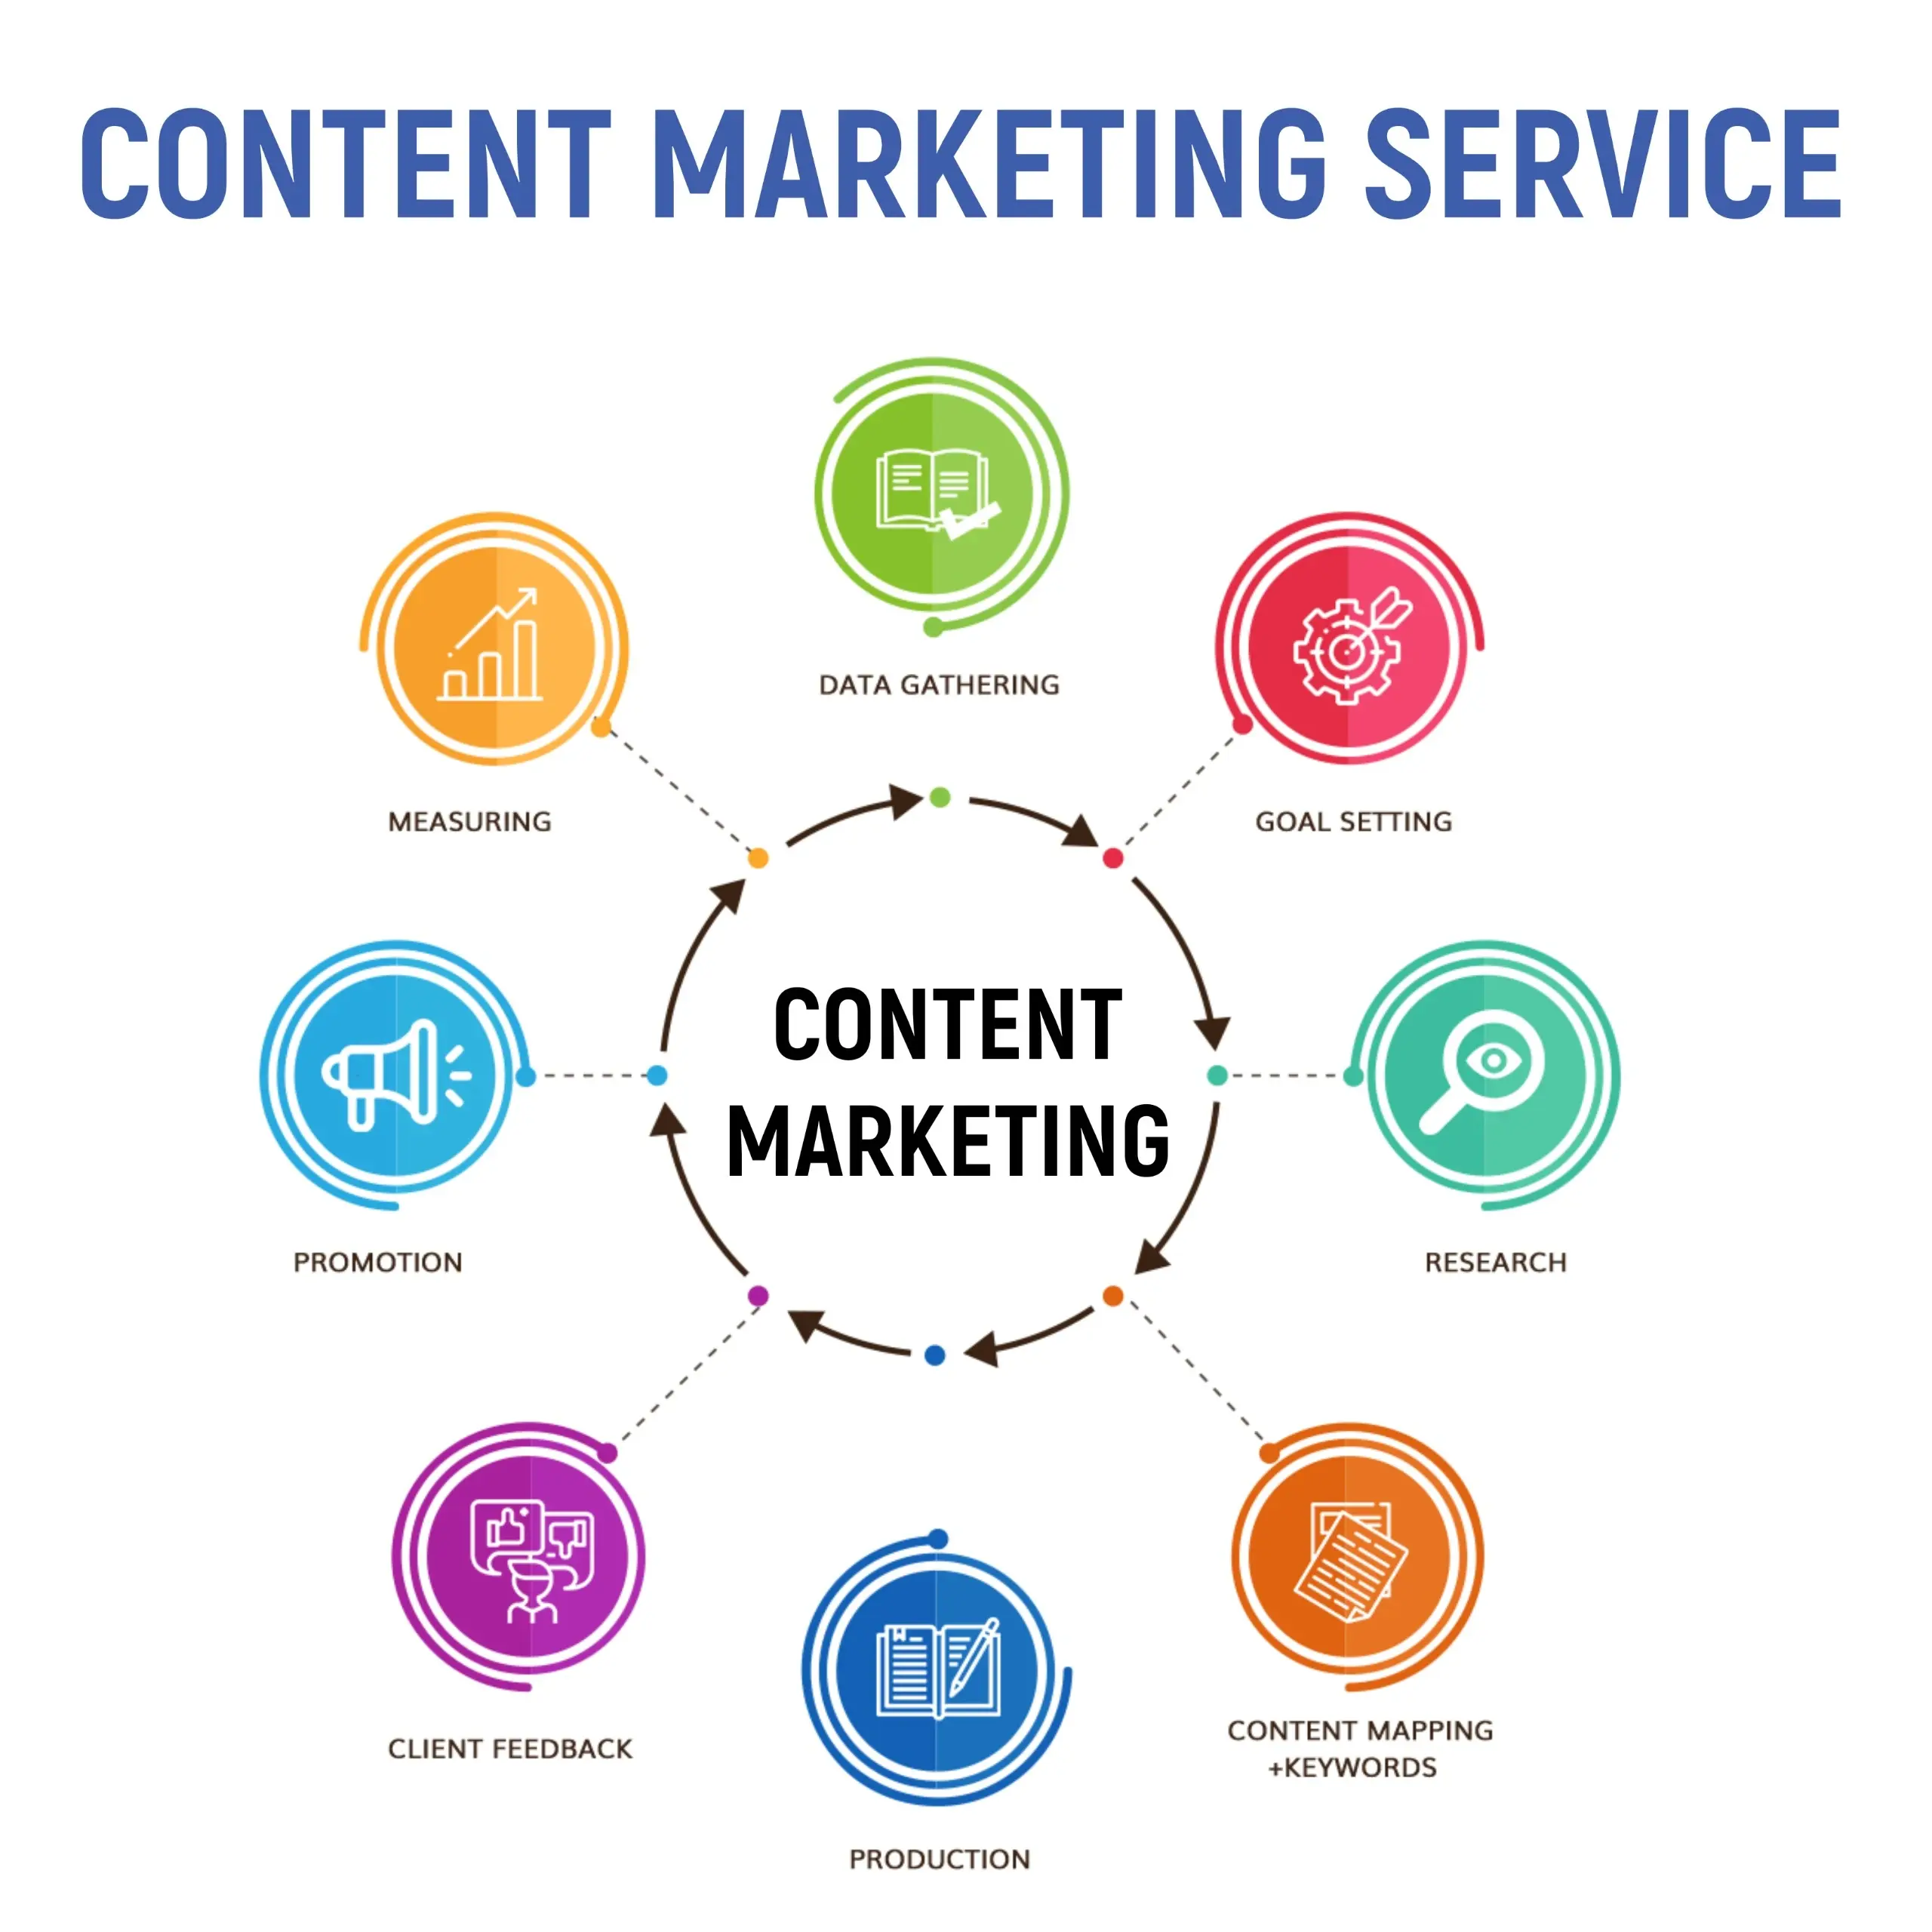 Content Marketing Services | Improve your brand visibility with quality content | Hide Media